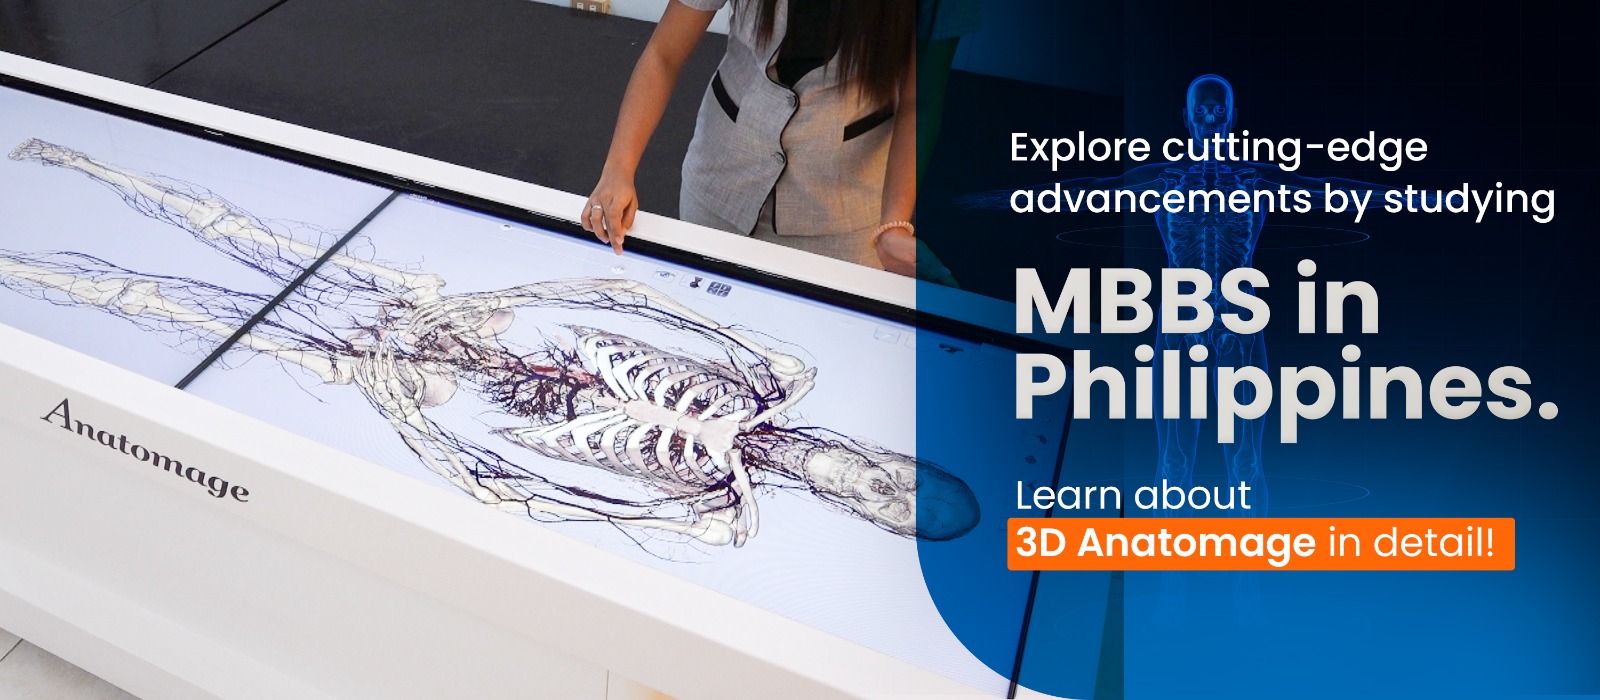 Explore cutting-edge advancements by studying MBBS in Philippines.Learn about 3D Anatomage in detail!